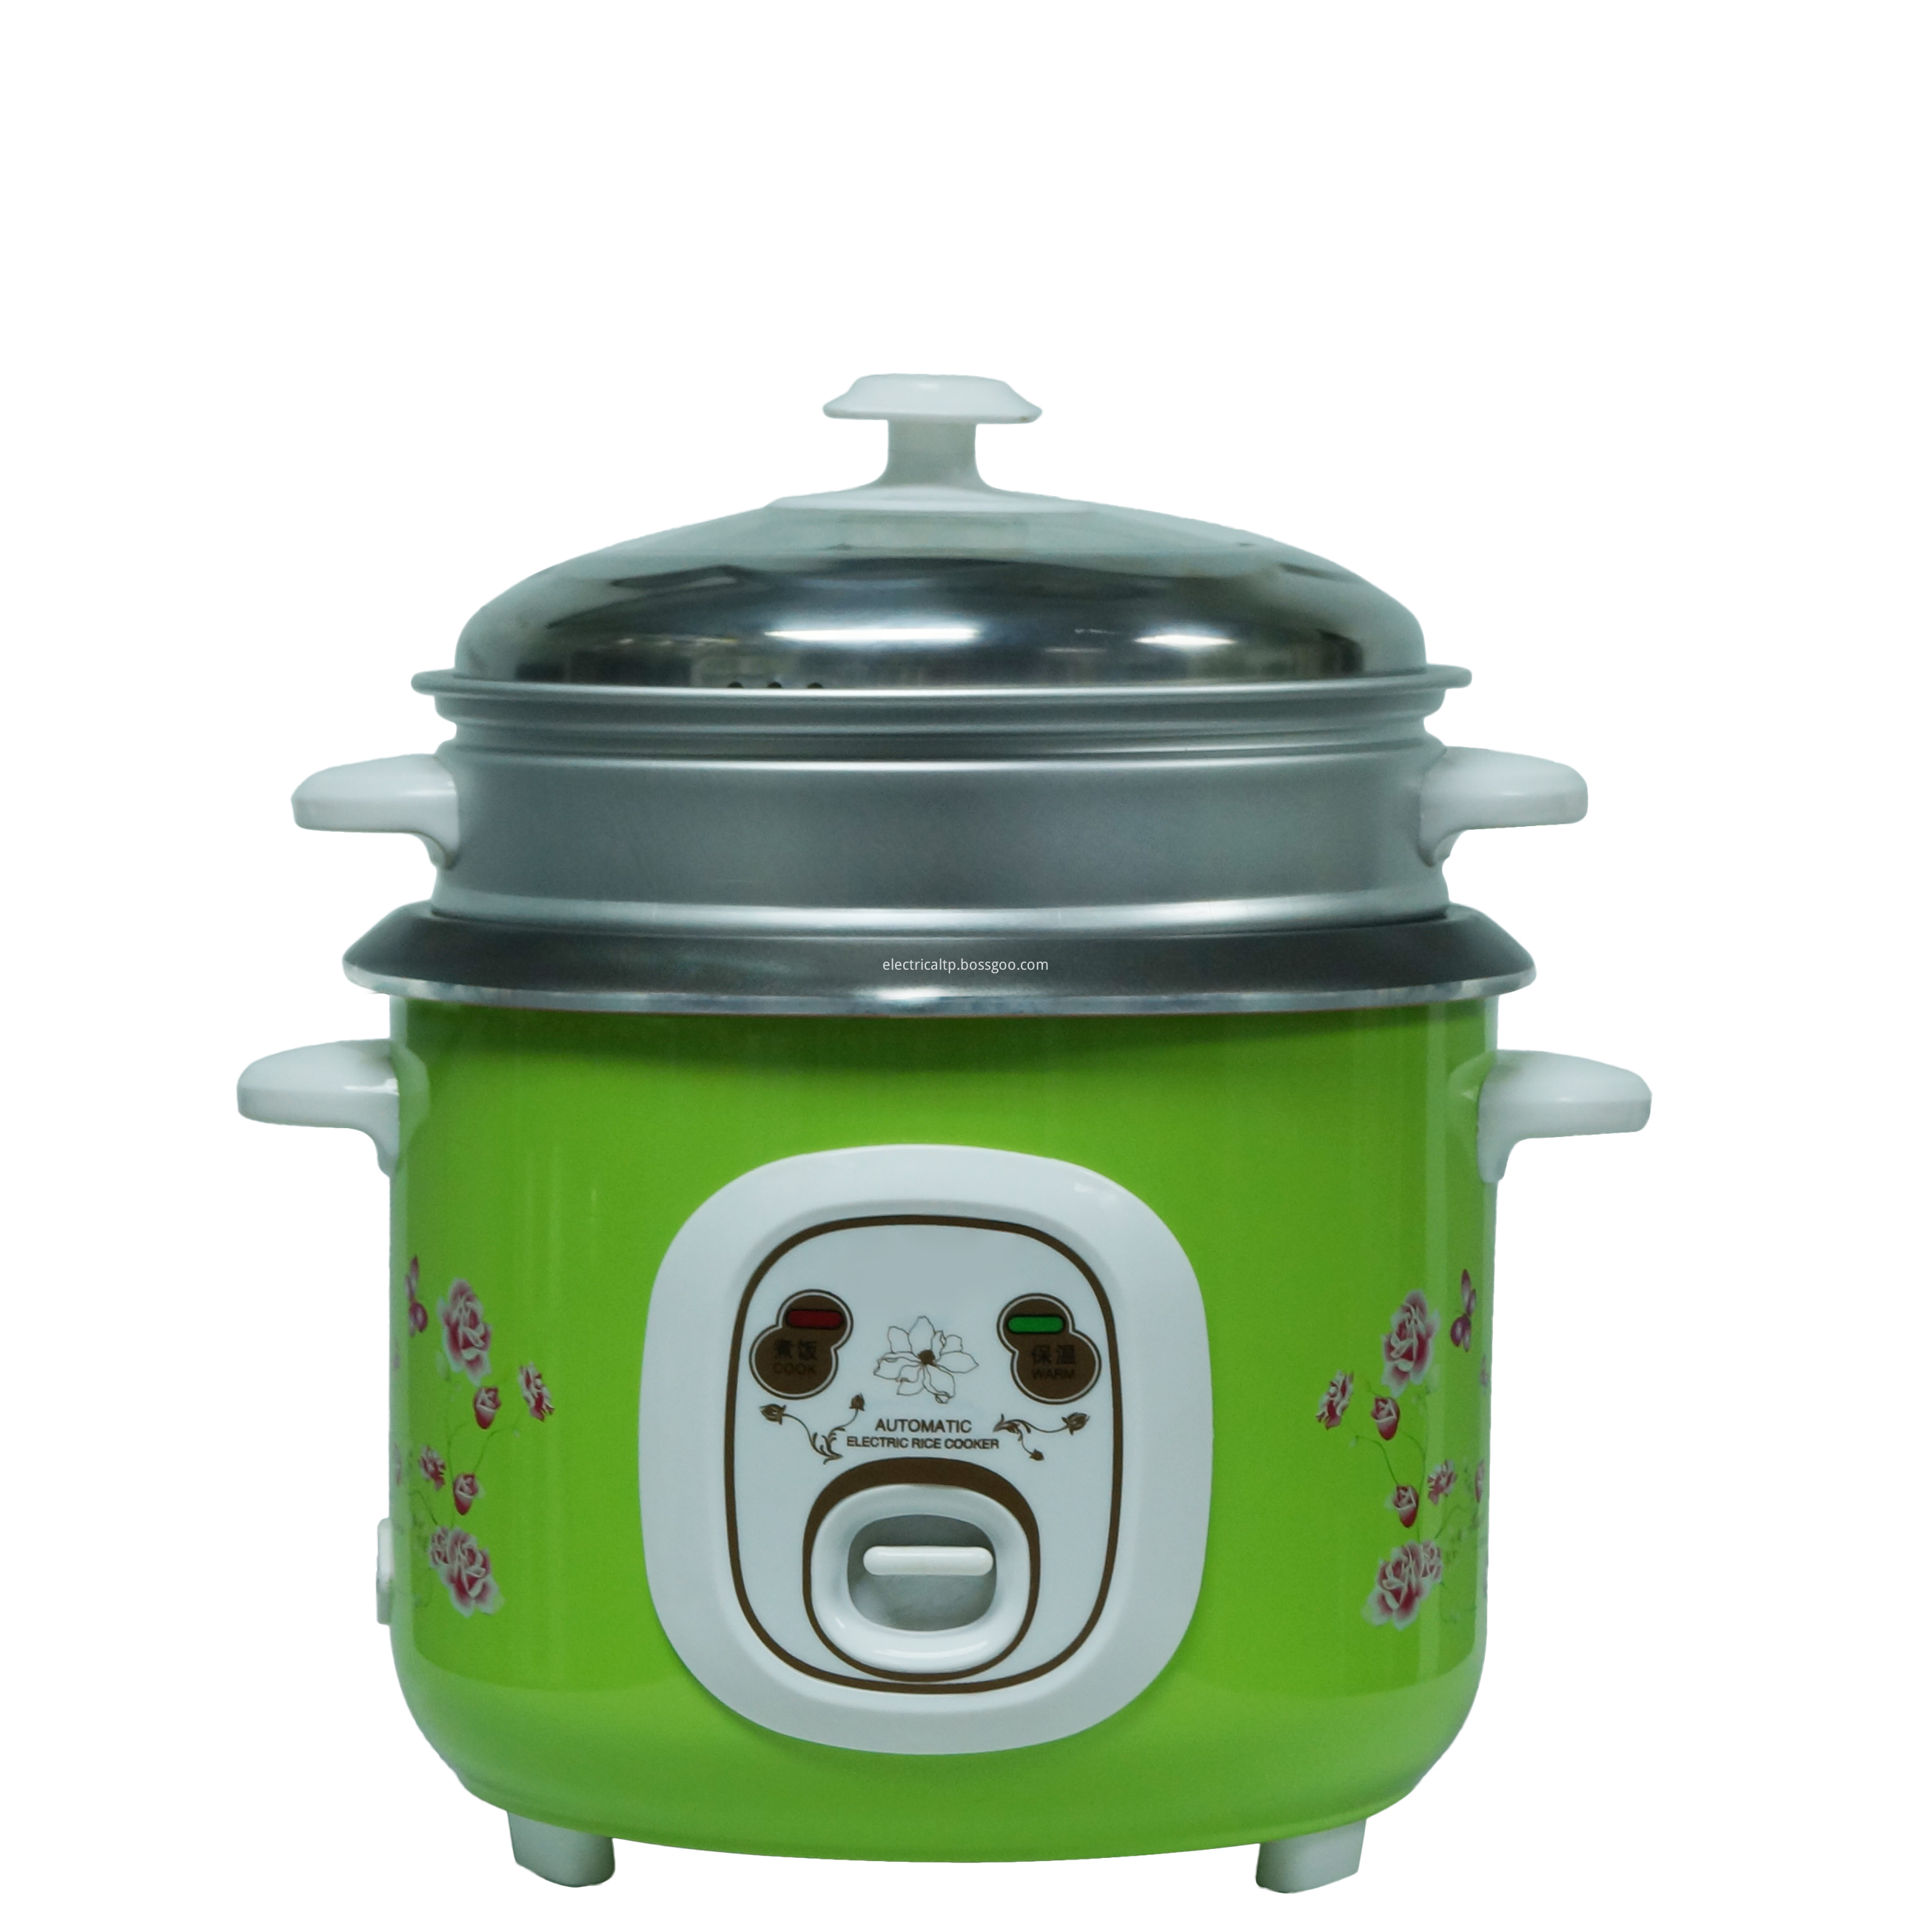 One Person Electrical Rice Cooker